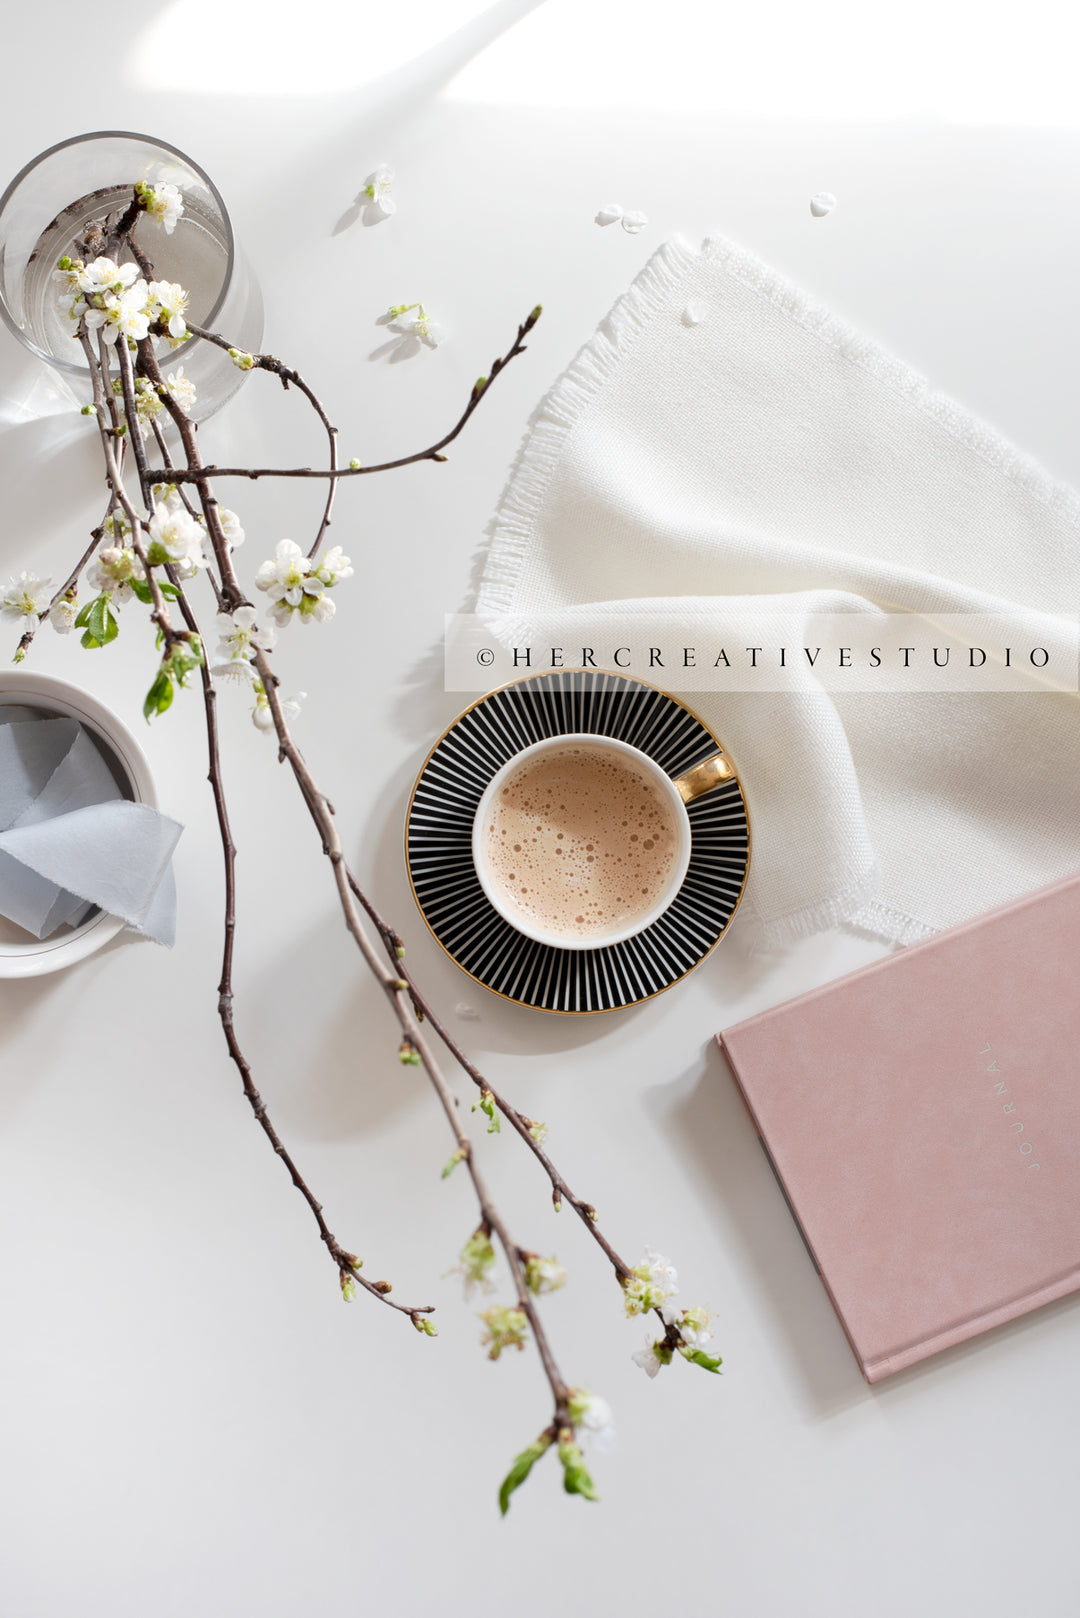 Coffee, Pink Notebook & Blooming Twigs, Styled Image